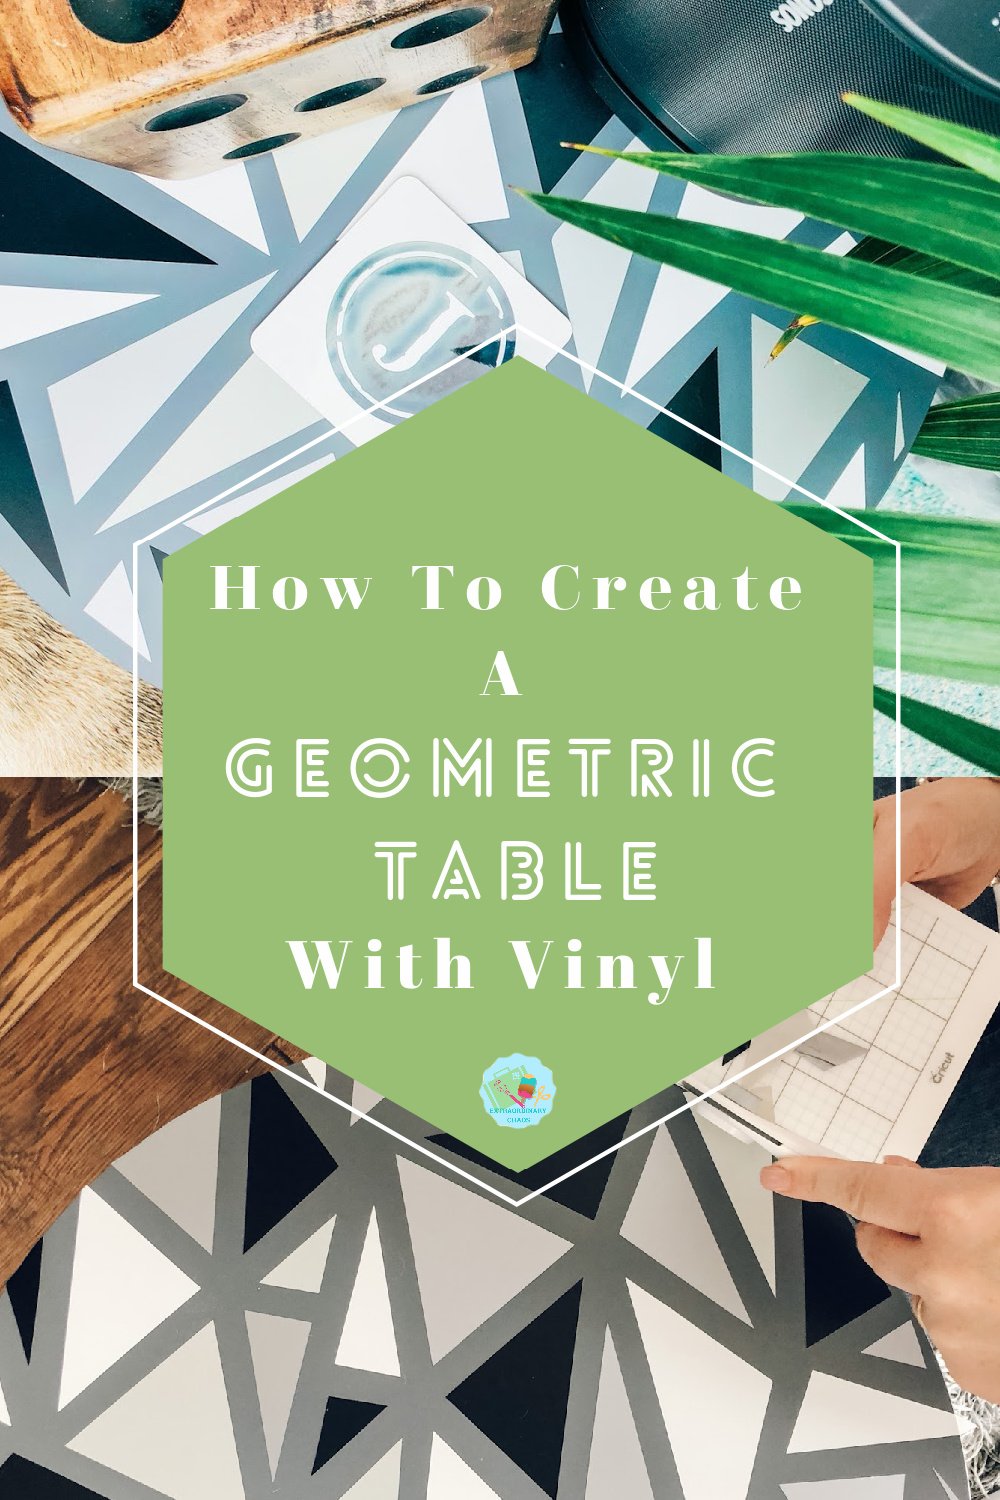 How to create a geometric table and be able to up cycle furniture with Cricut